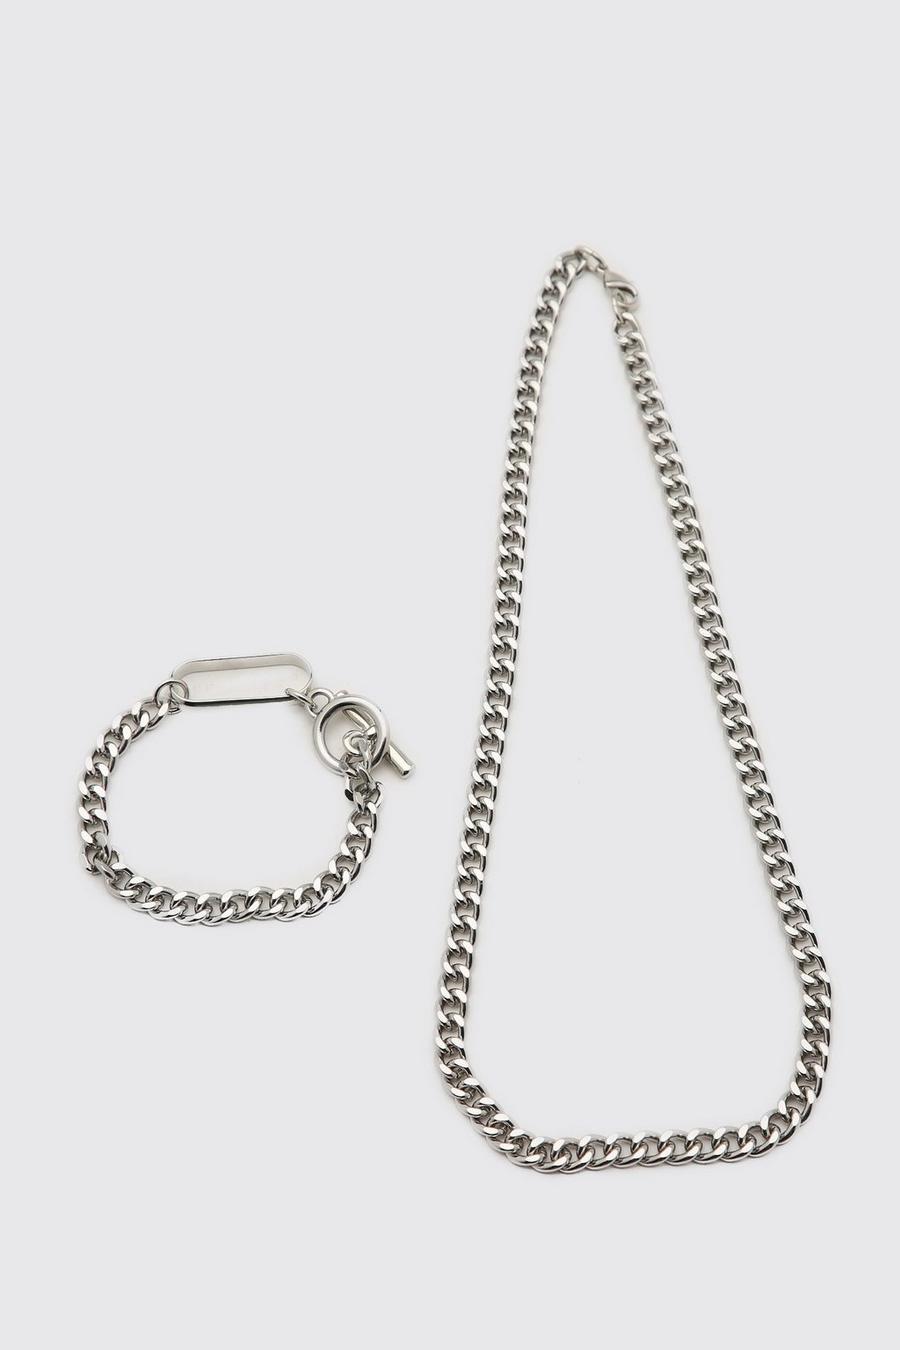 Silver argent Chunky Chain And Bracelet Set With Toggle